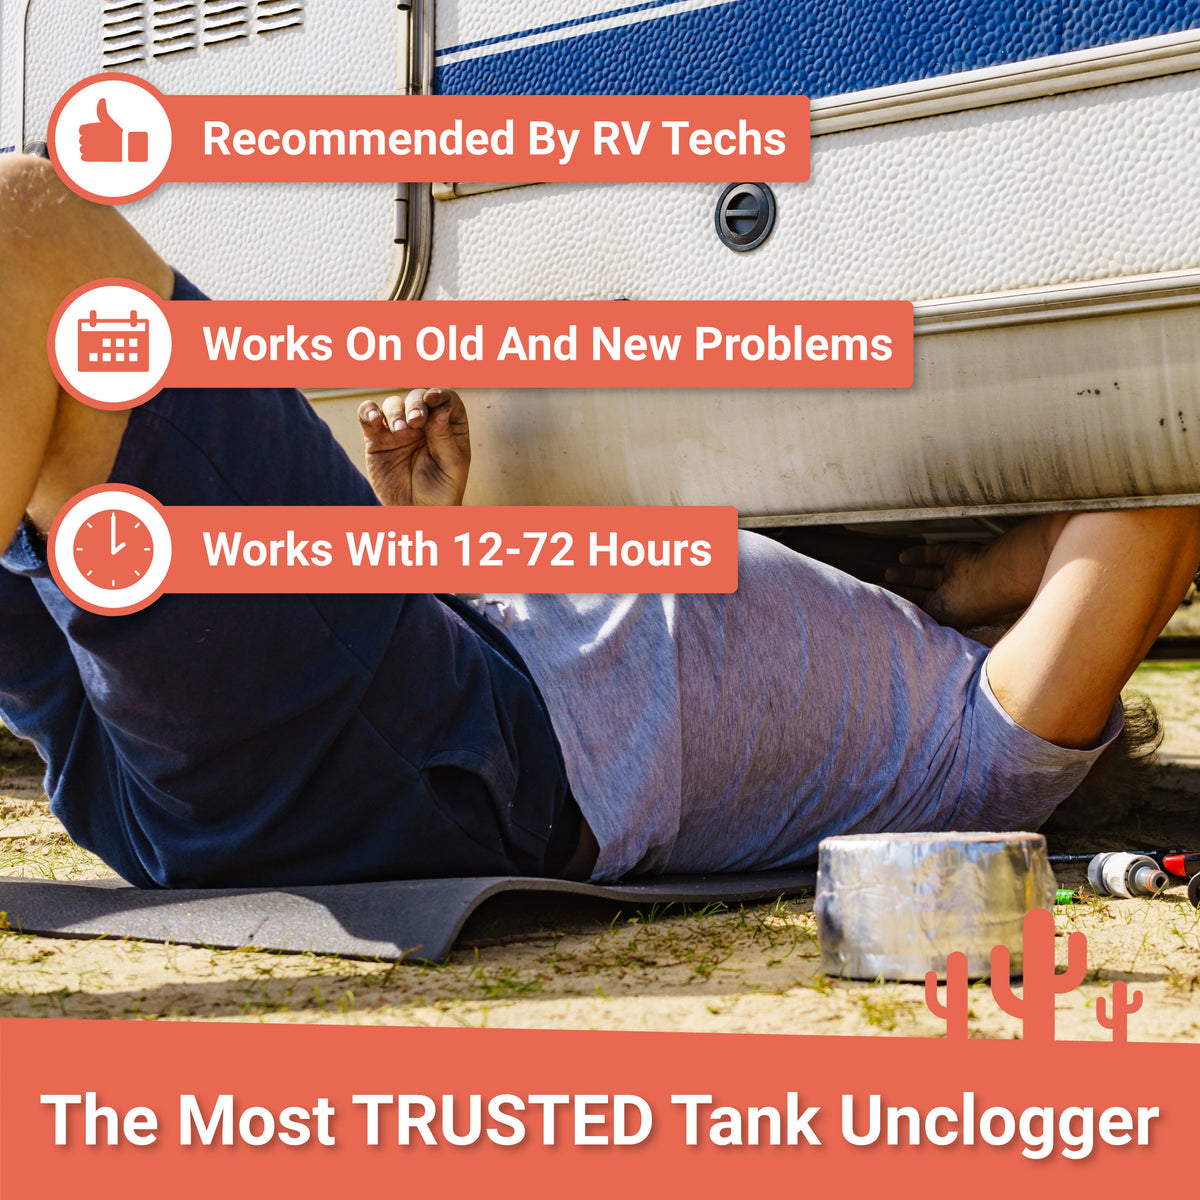 Clear-It is the most trusted tank unclogger by RV Technicians